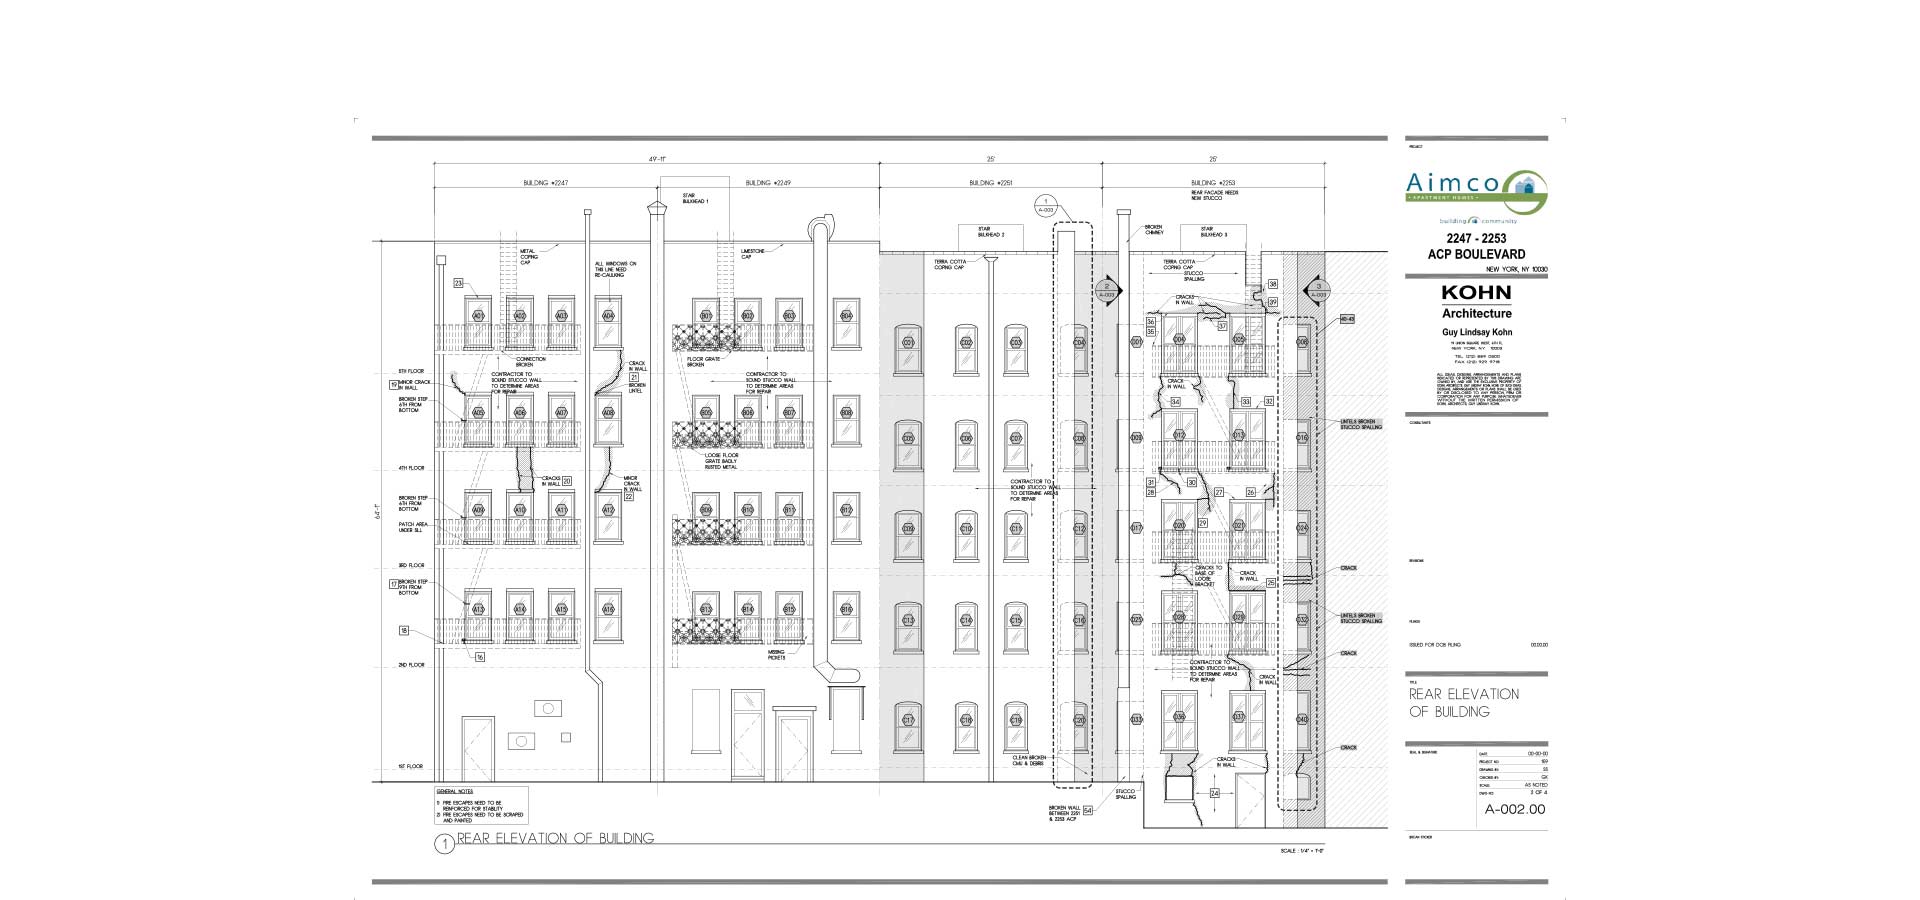 nyc department of buildings architectural blueprint for commercial building architecture